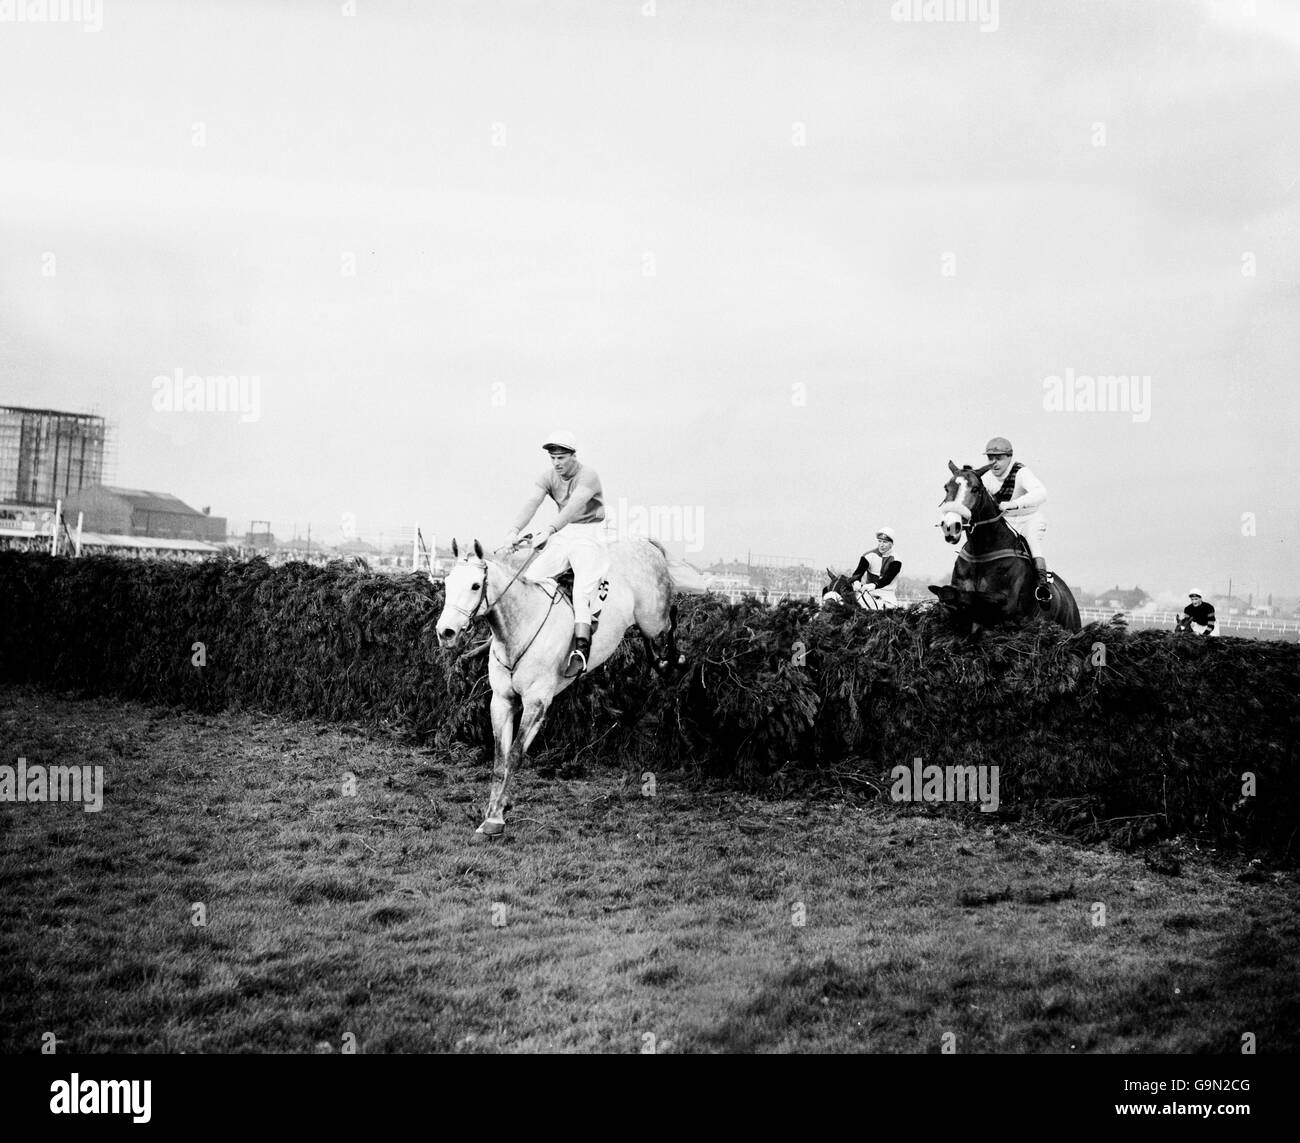 Horse Racing - The Grand National - Aintree. Nicolaus Silver, ridden by Bobby Beasley, on his way to victory Stock Photo